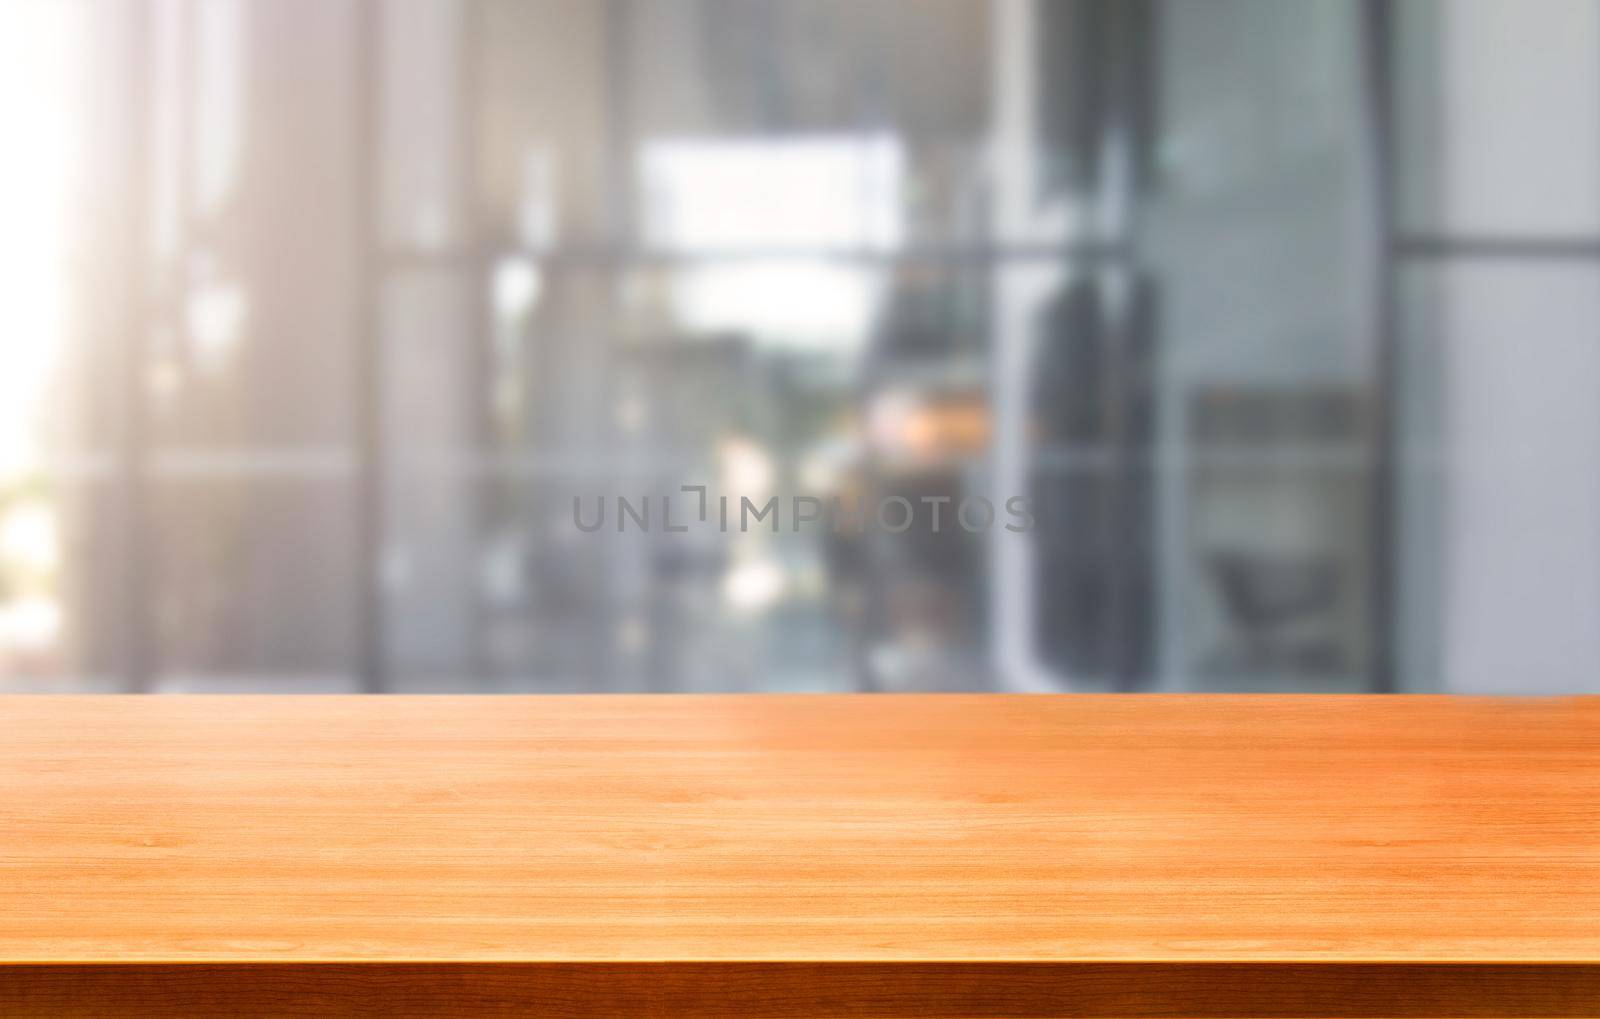 Wood table in city center modern office background with empty copy space on the table for product display mockup. Workspace desk interior and place for corporate business.